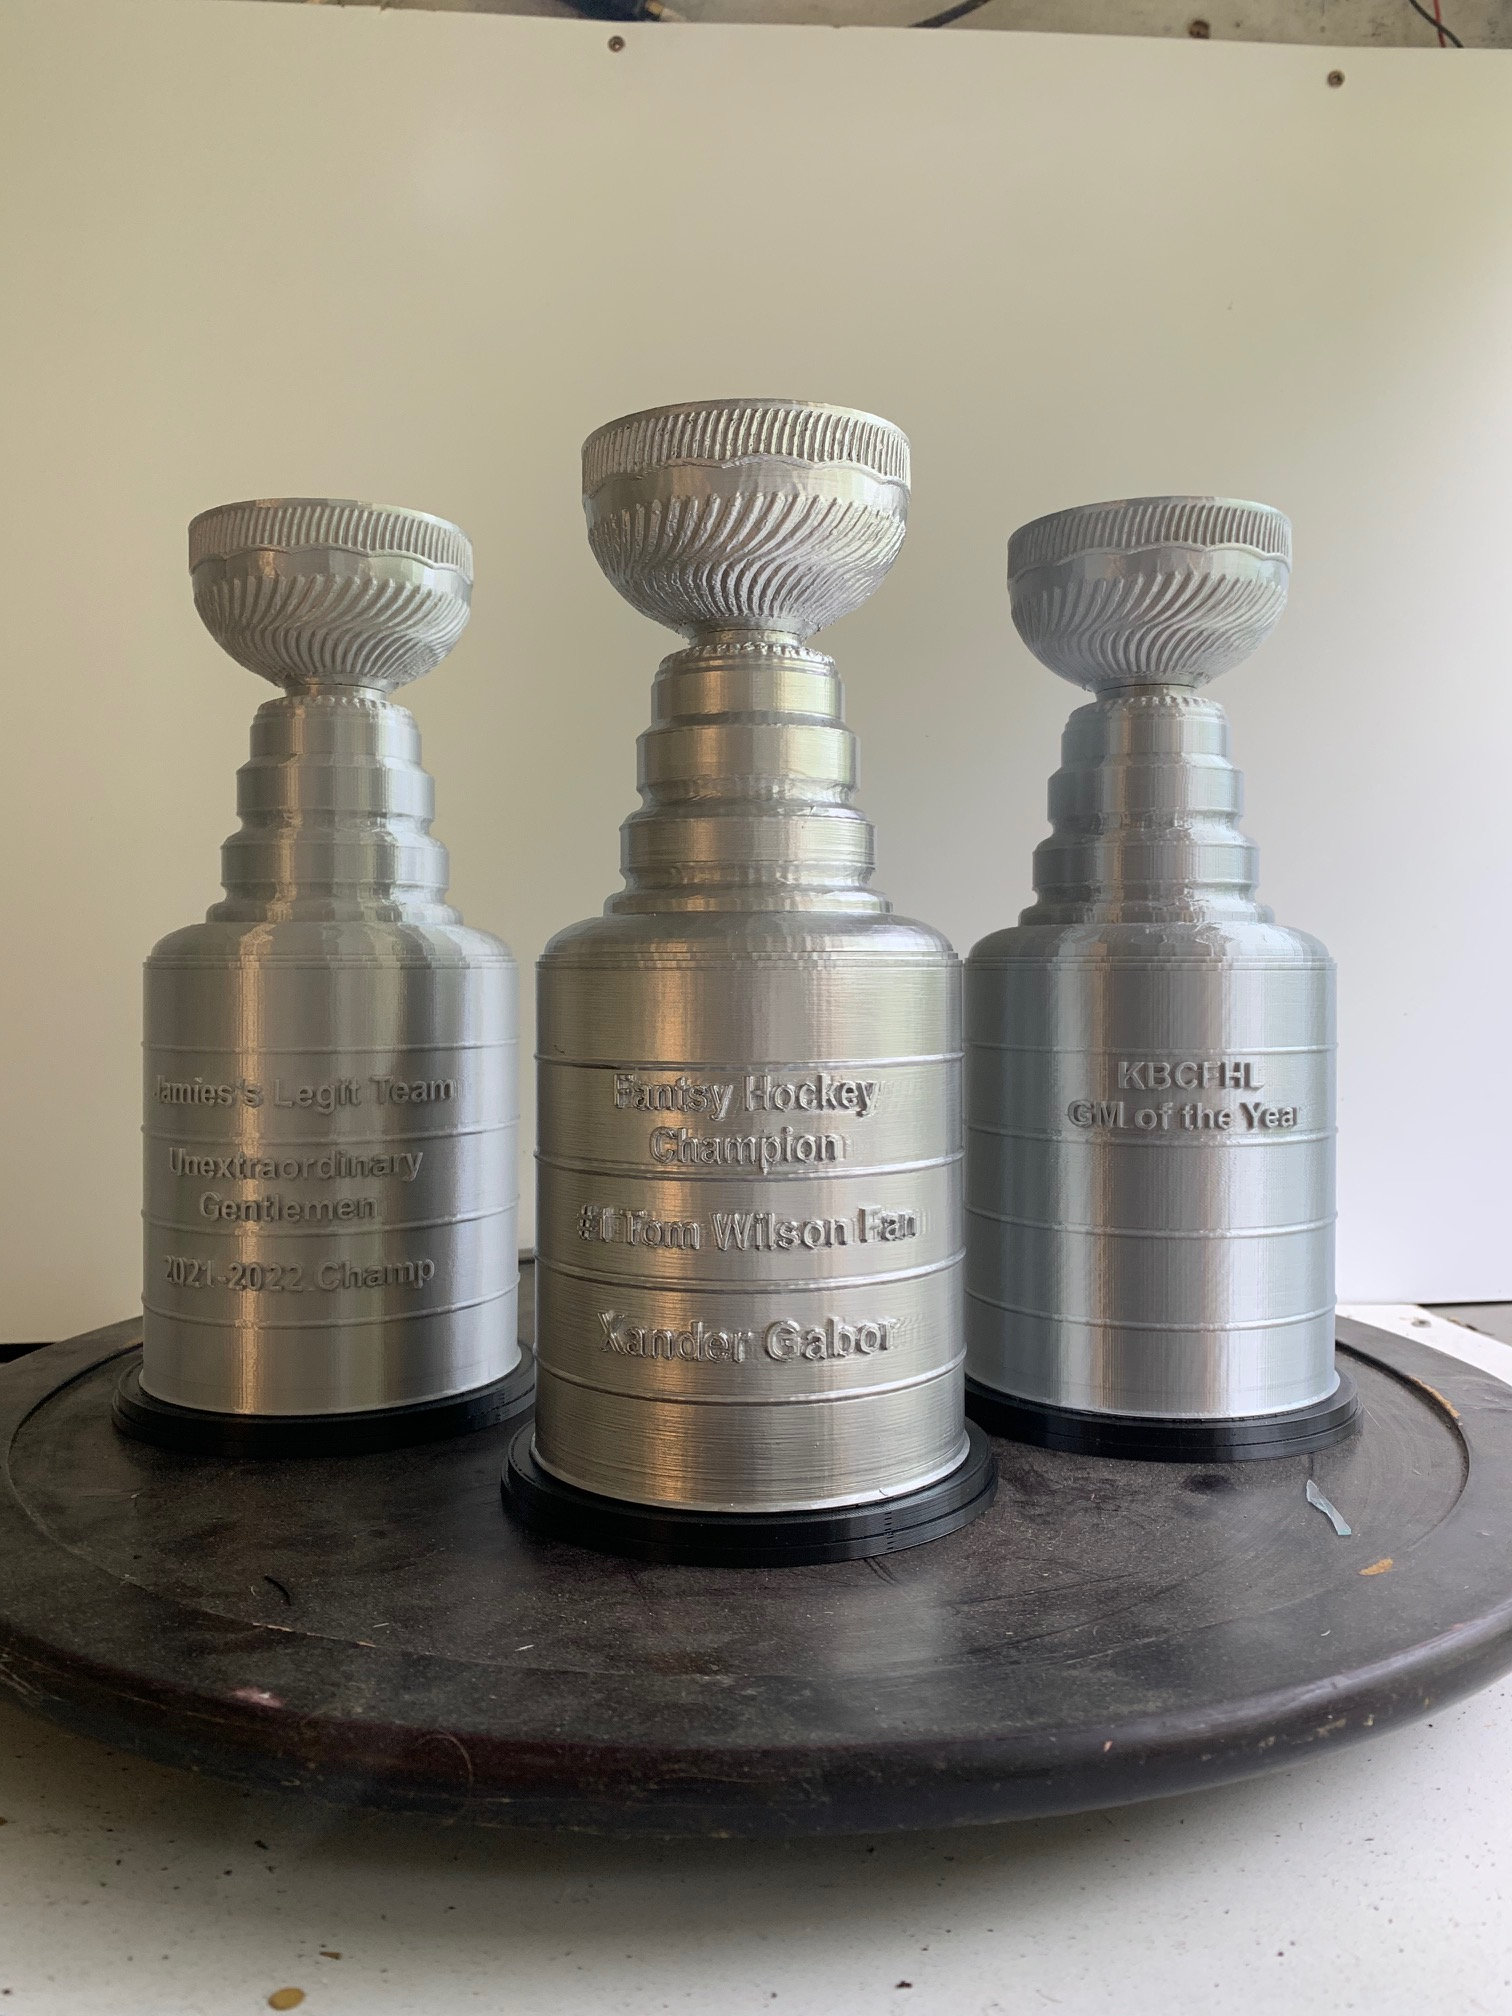 NHL 8 inch Stanley Cup Replica - Great for Autographs - New in the